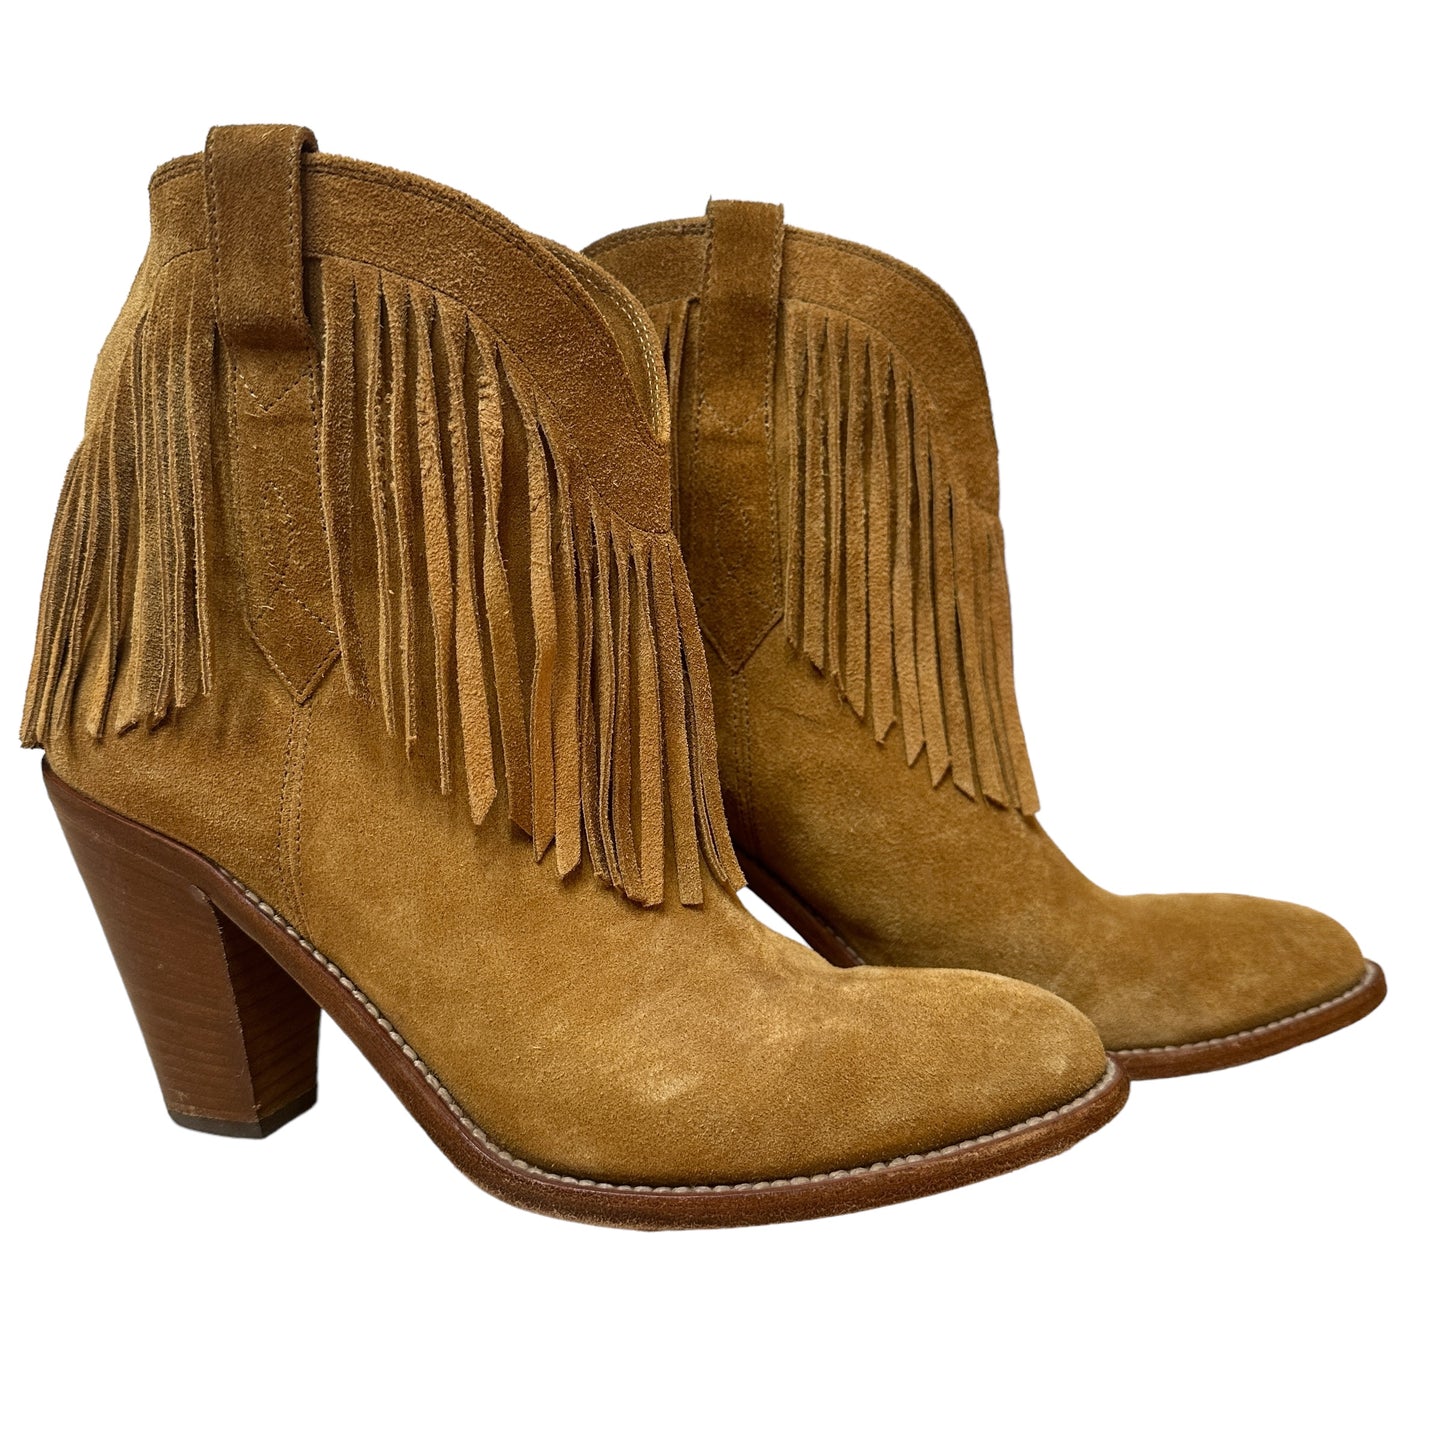 Brown Fringed Boots - 9